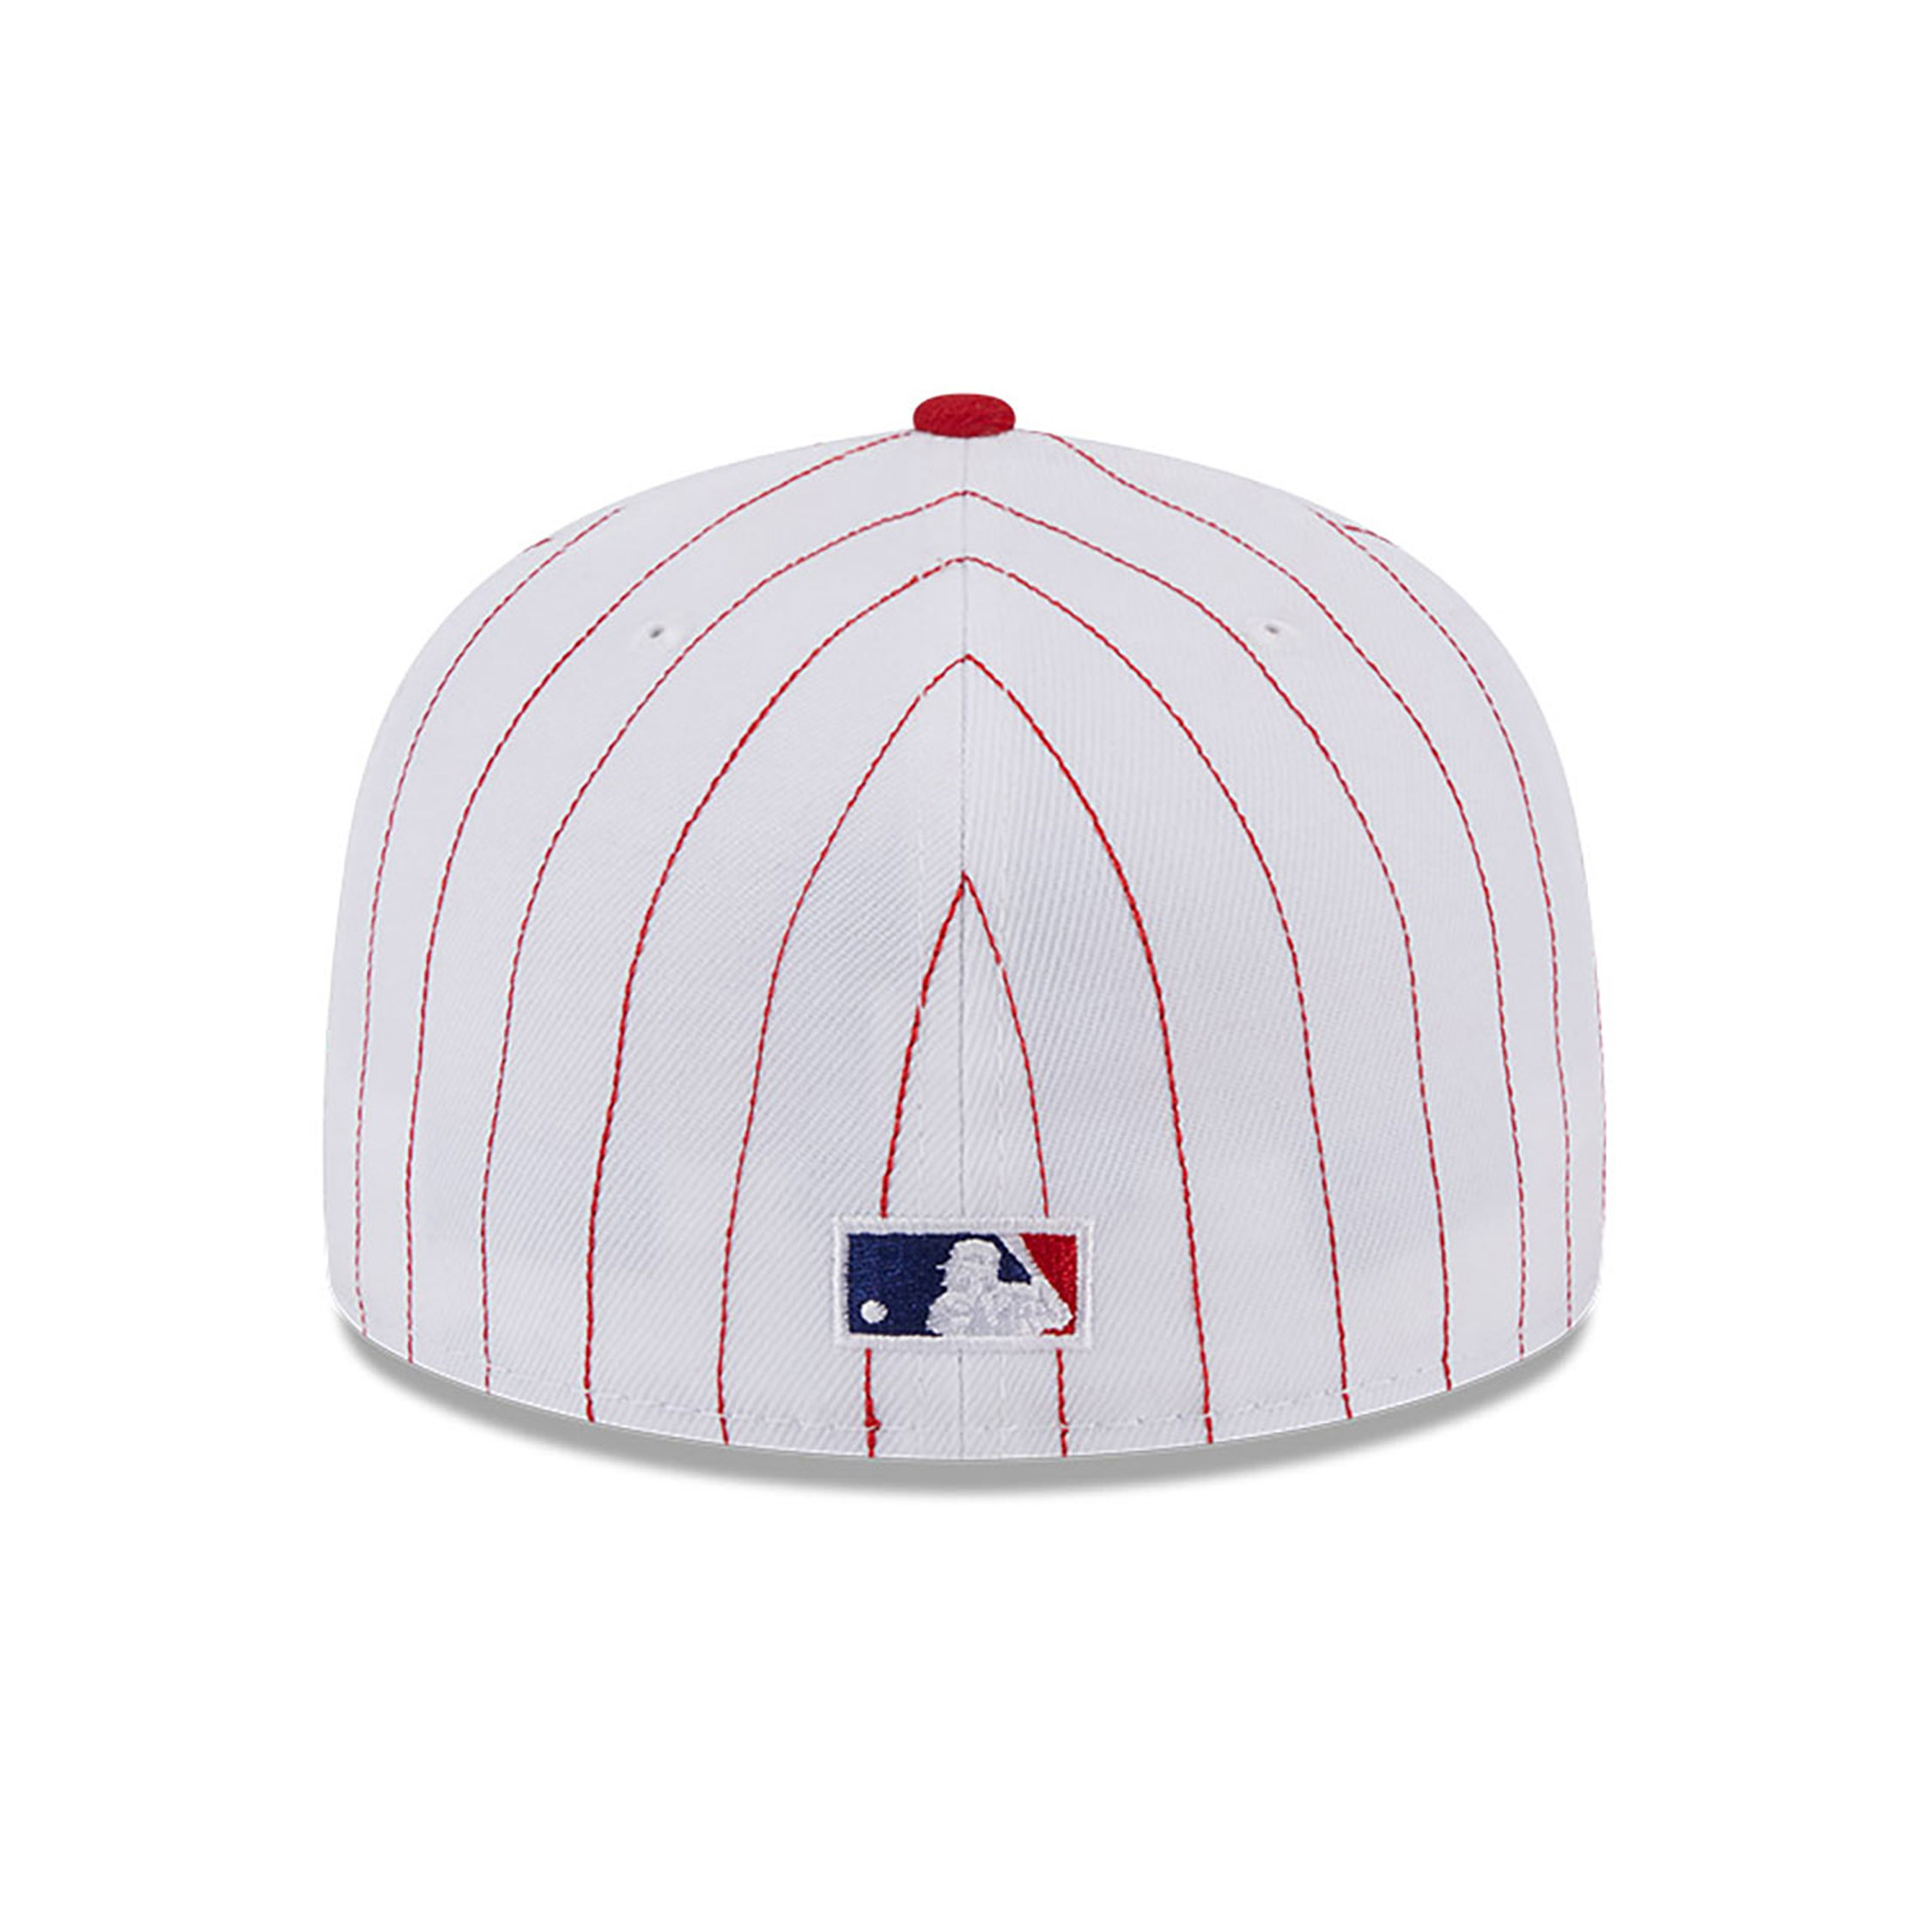 Philadelphia Phillies MLB on Deck White 59FIFTY Fitted Cap